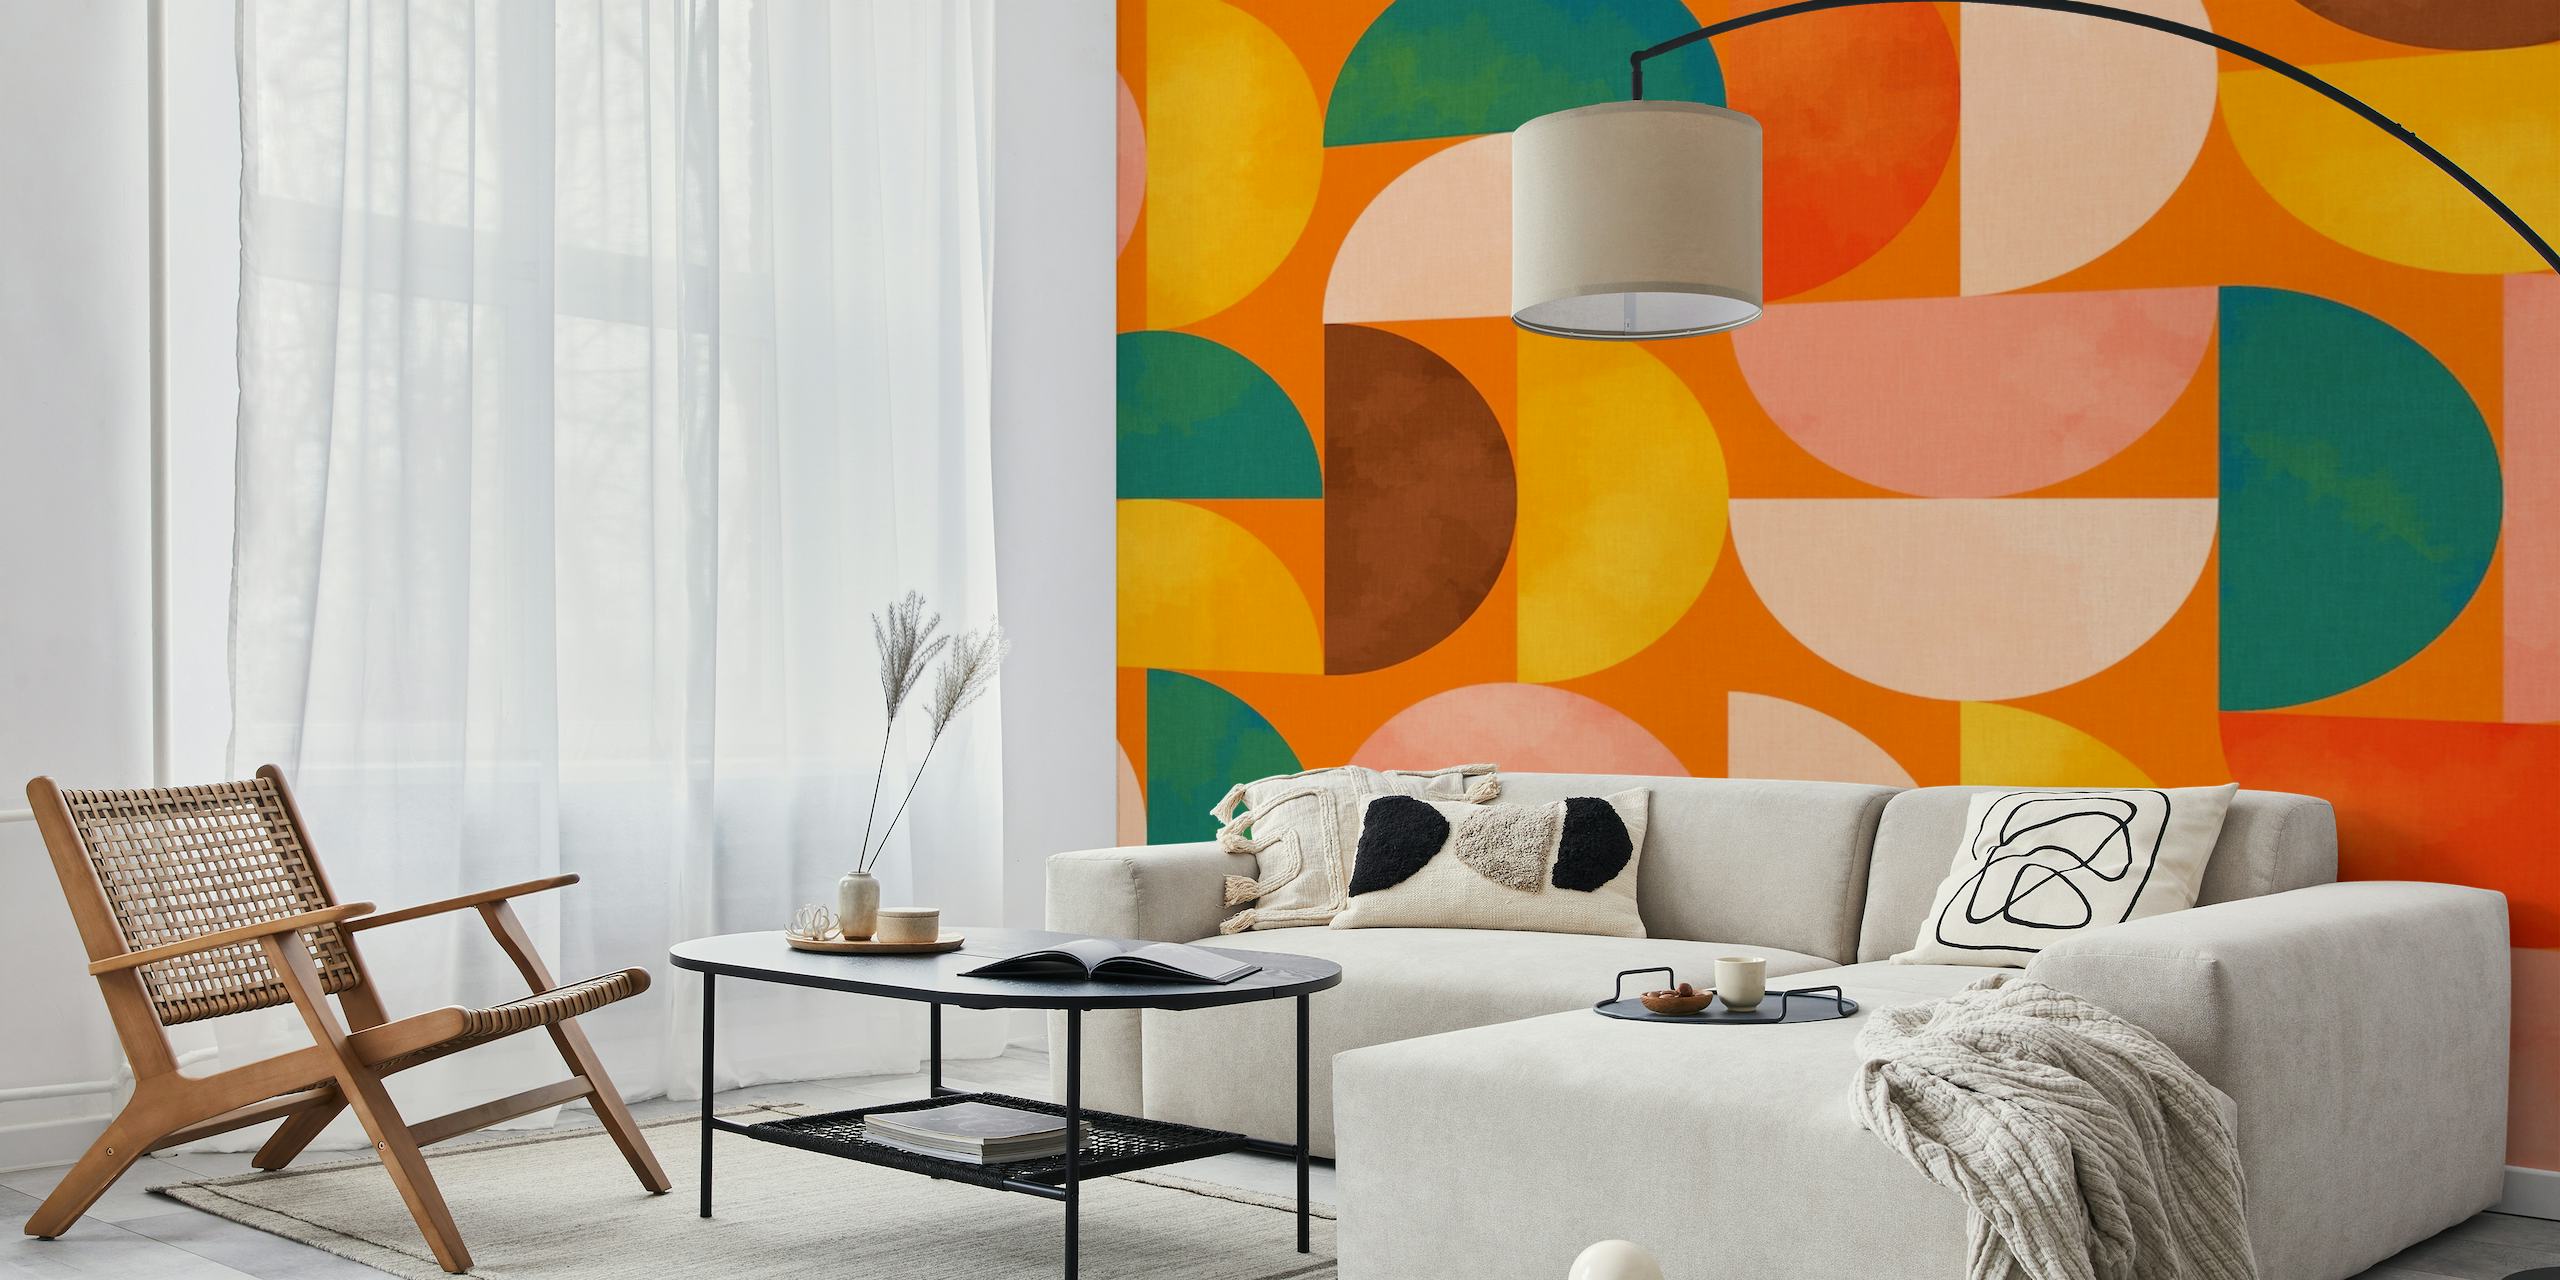 Mid-century modern geometric wall mural in shades of orange, teal, and brown